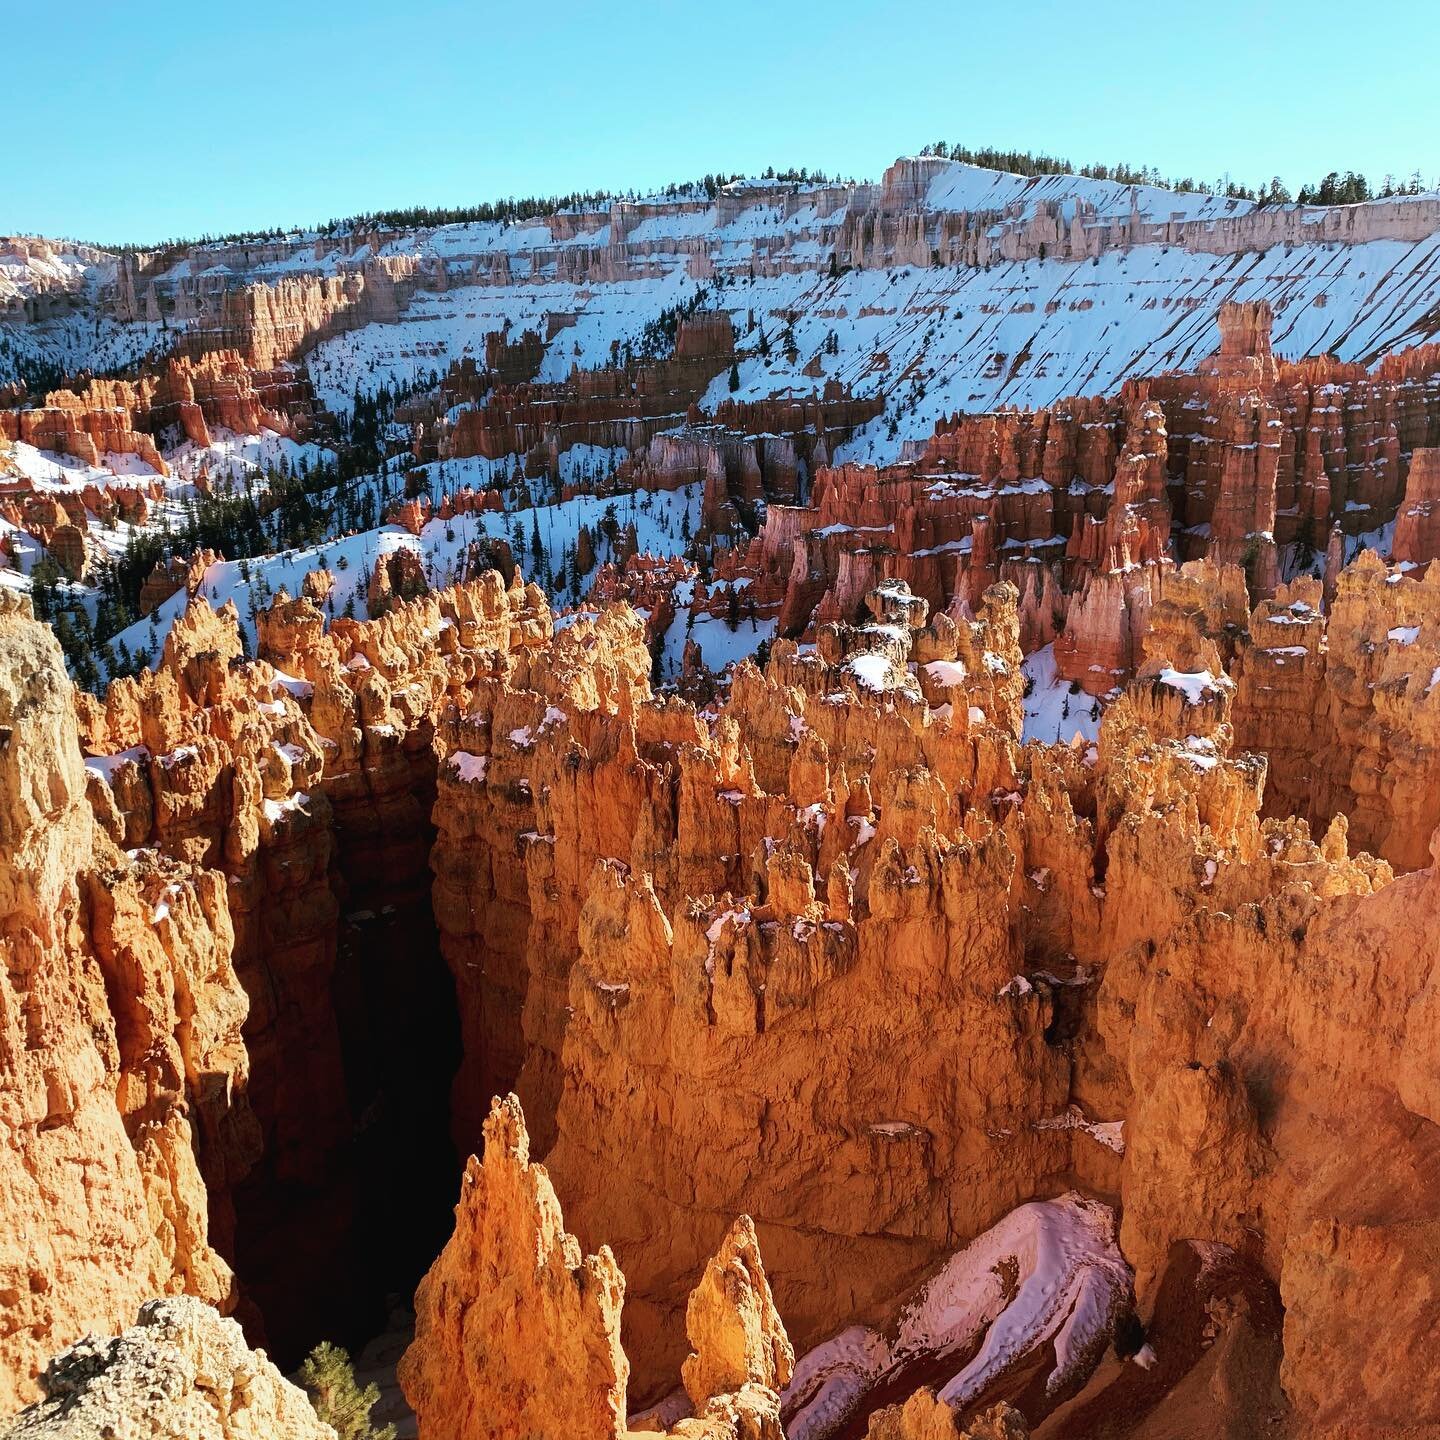 Hoodoo you love?! Visiting Bryce Canyon National Park is like landing on another planet! Truly out of this world! #brycecanyon #utah #nationalparks #nature #naturephotography #roadtrip #travel #travelphoto #adventure #naturalbeauty #wanderlust #wande